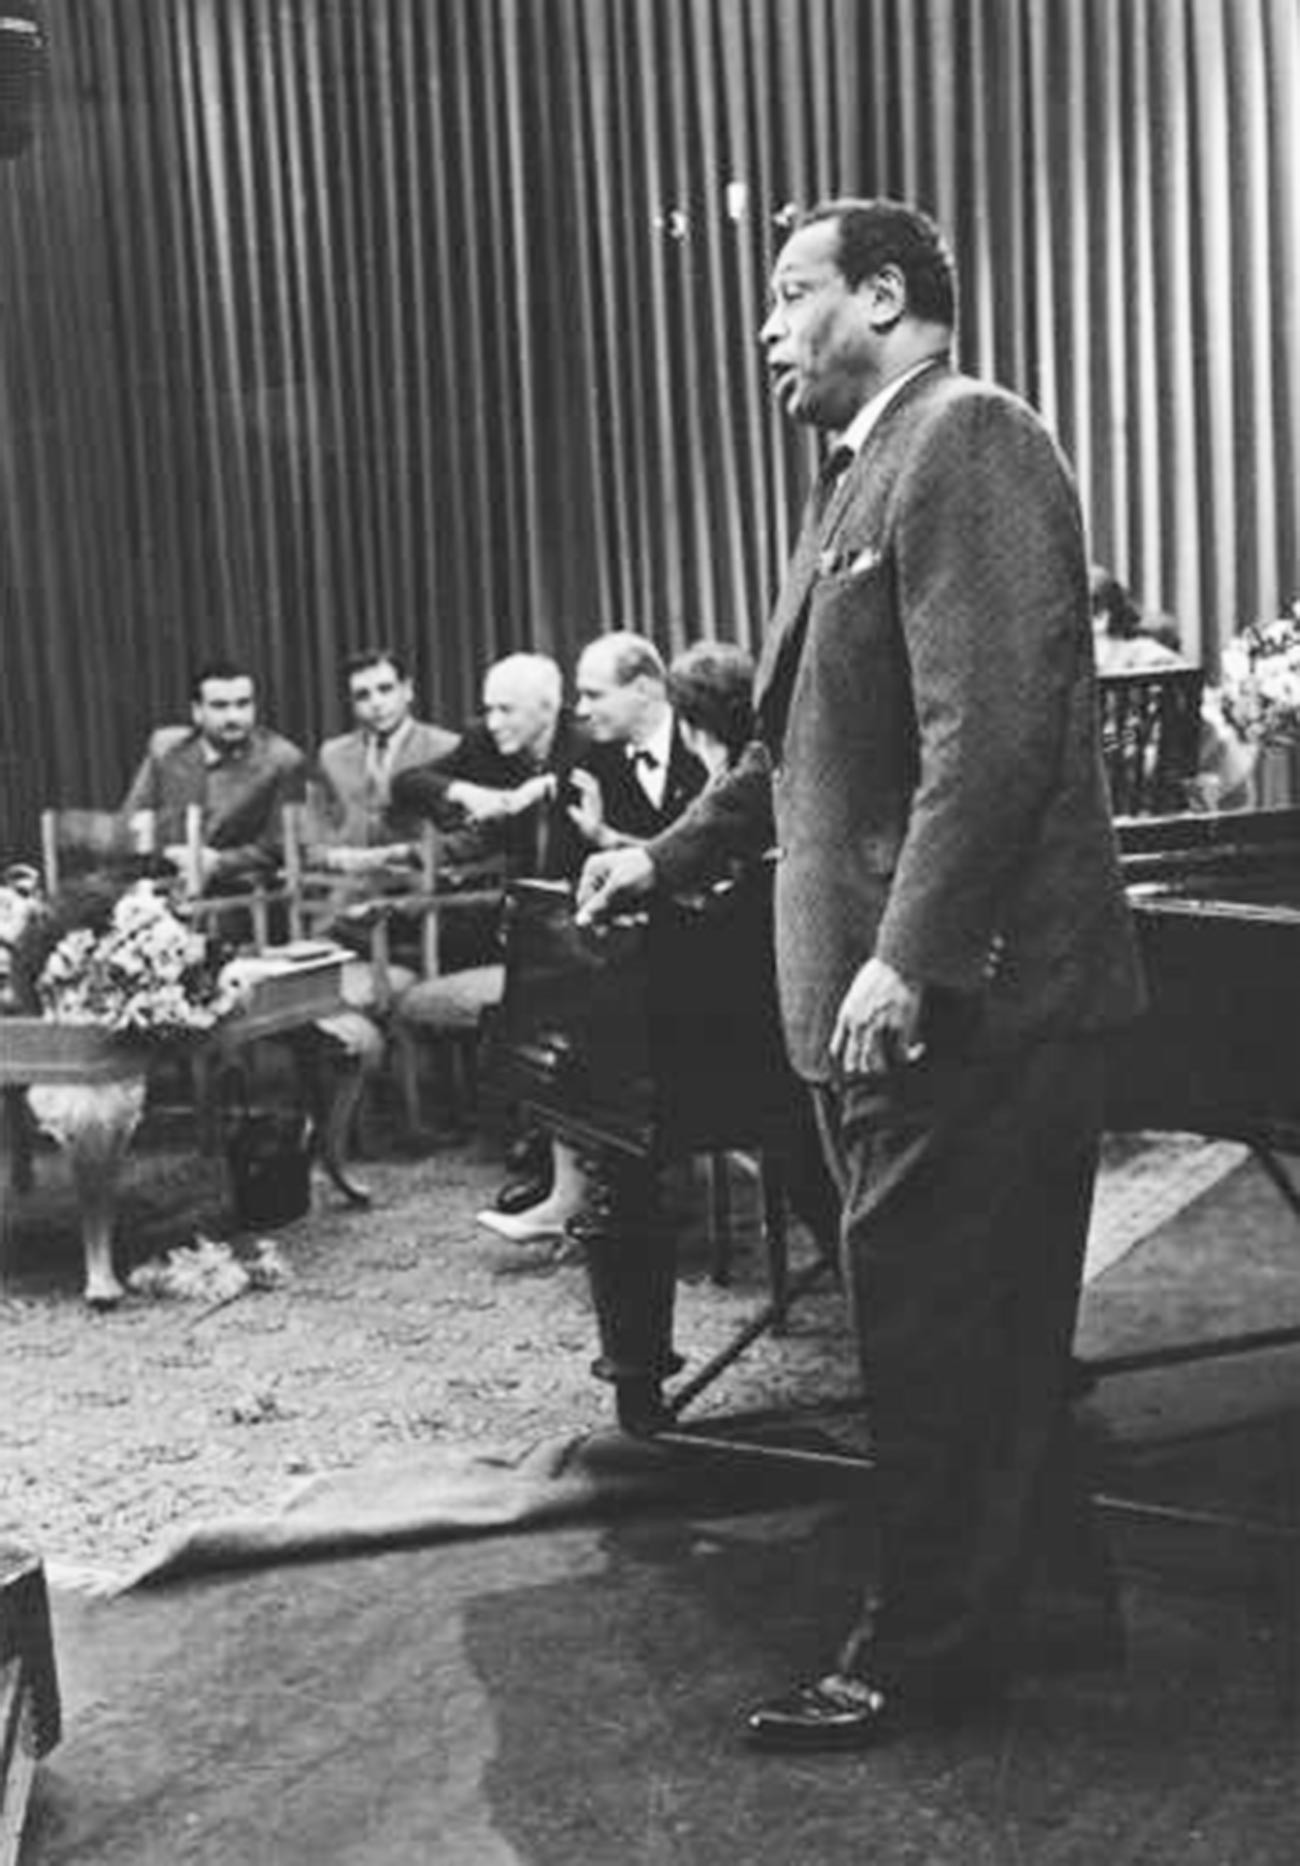 Paul Robeson performing in Moscow, 1958